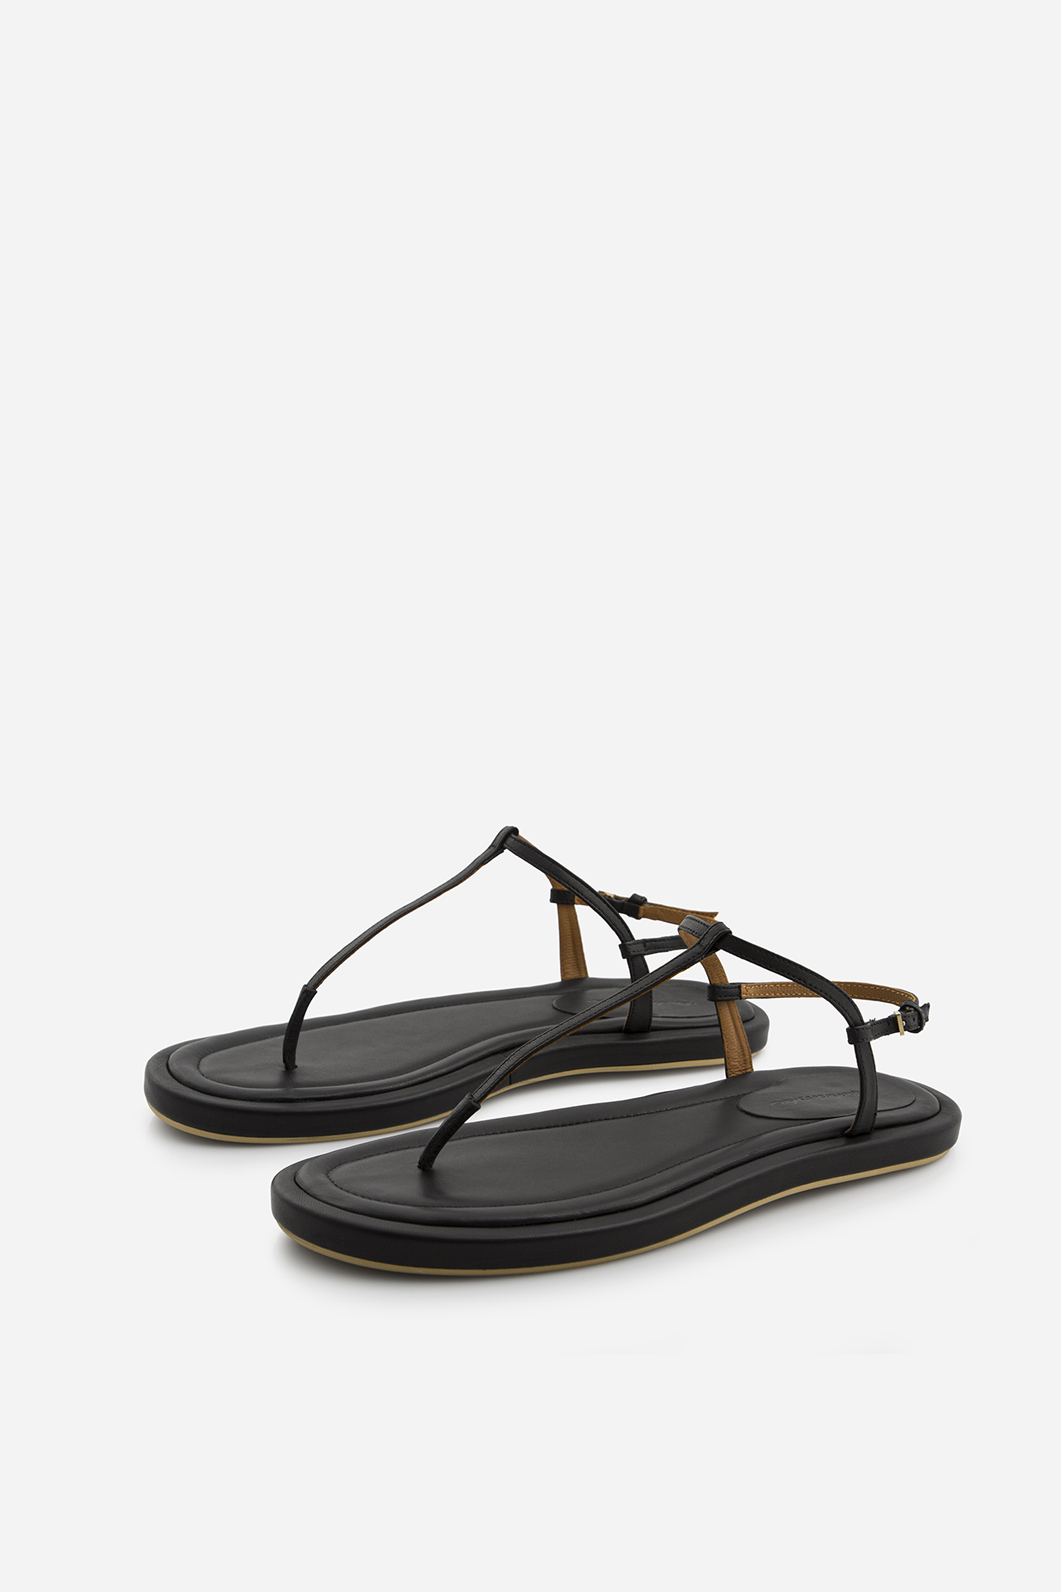 Milly black leather
sandals